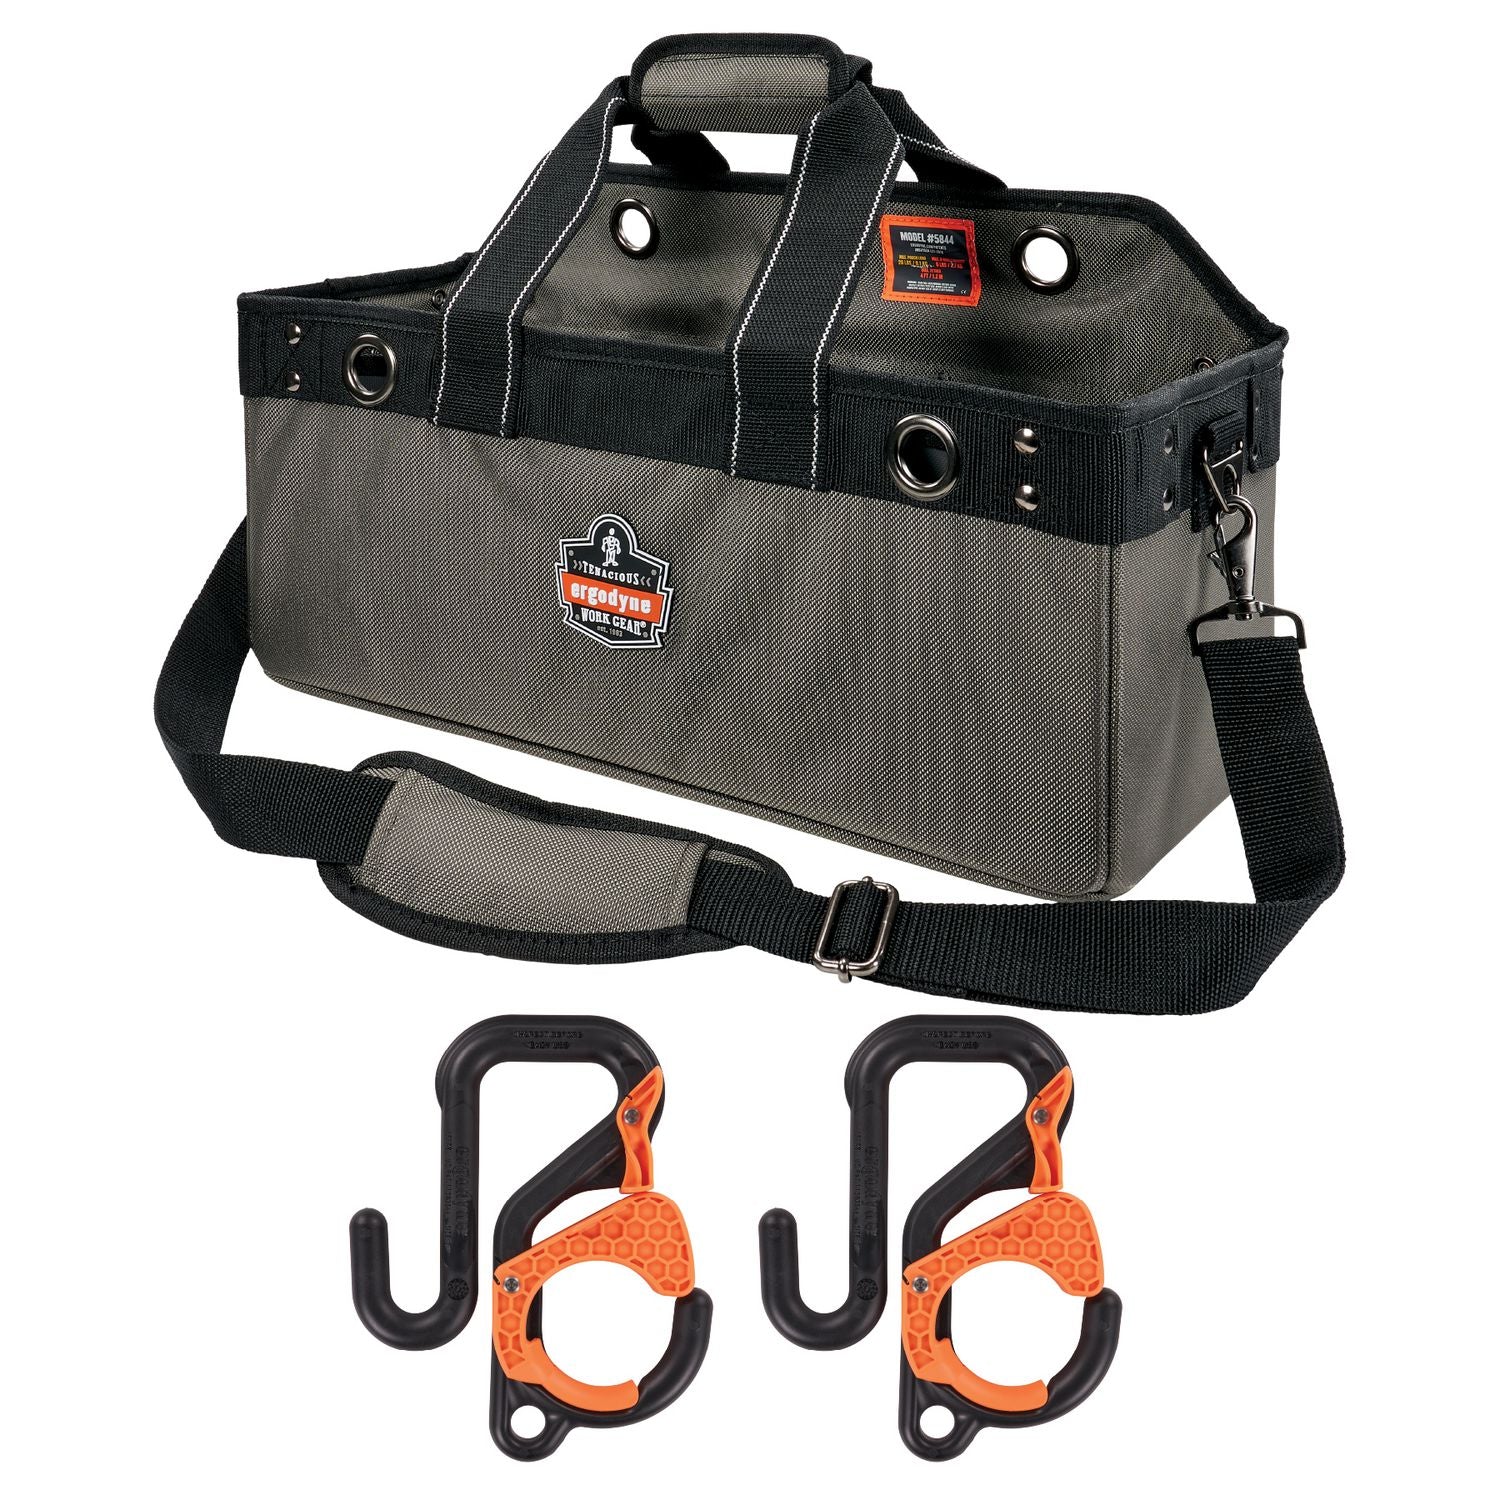 arsenal-5846-bucket-truck-tool-bag-locking-aerial-bucket-hooks-11-comp-5-grommets-18x75x75-gray-ships-in-1-3-bus-days_ego13747 - 1